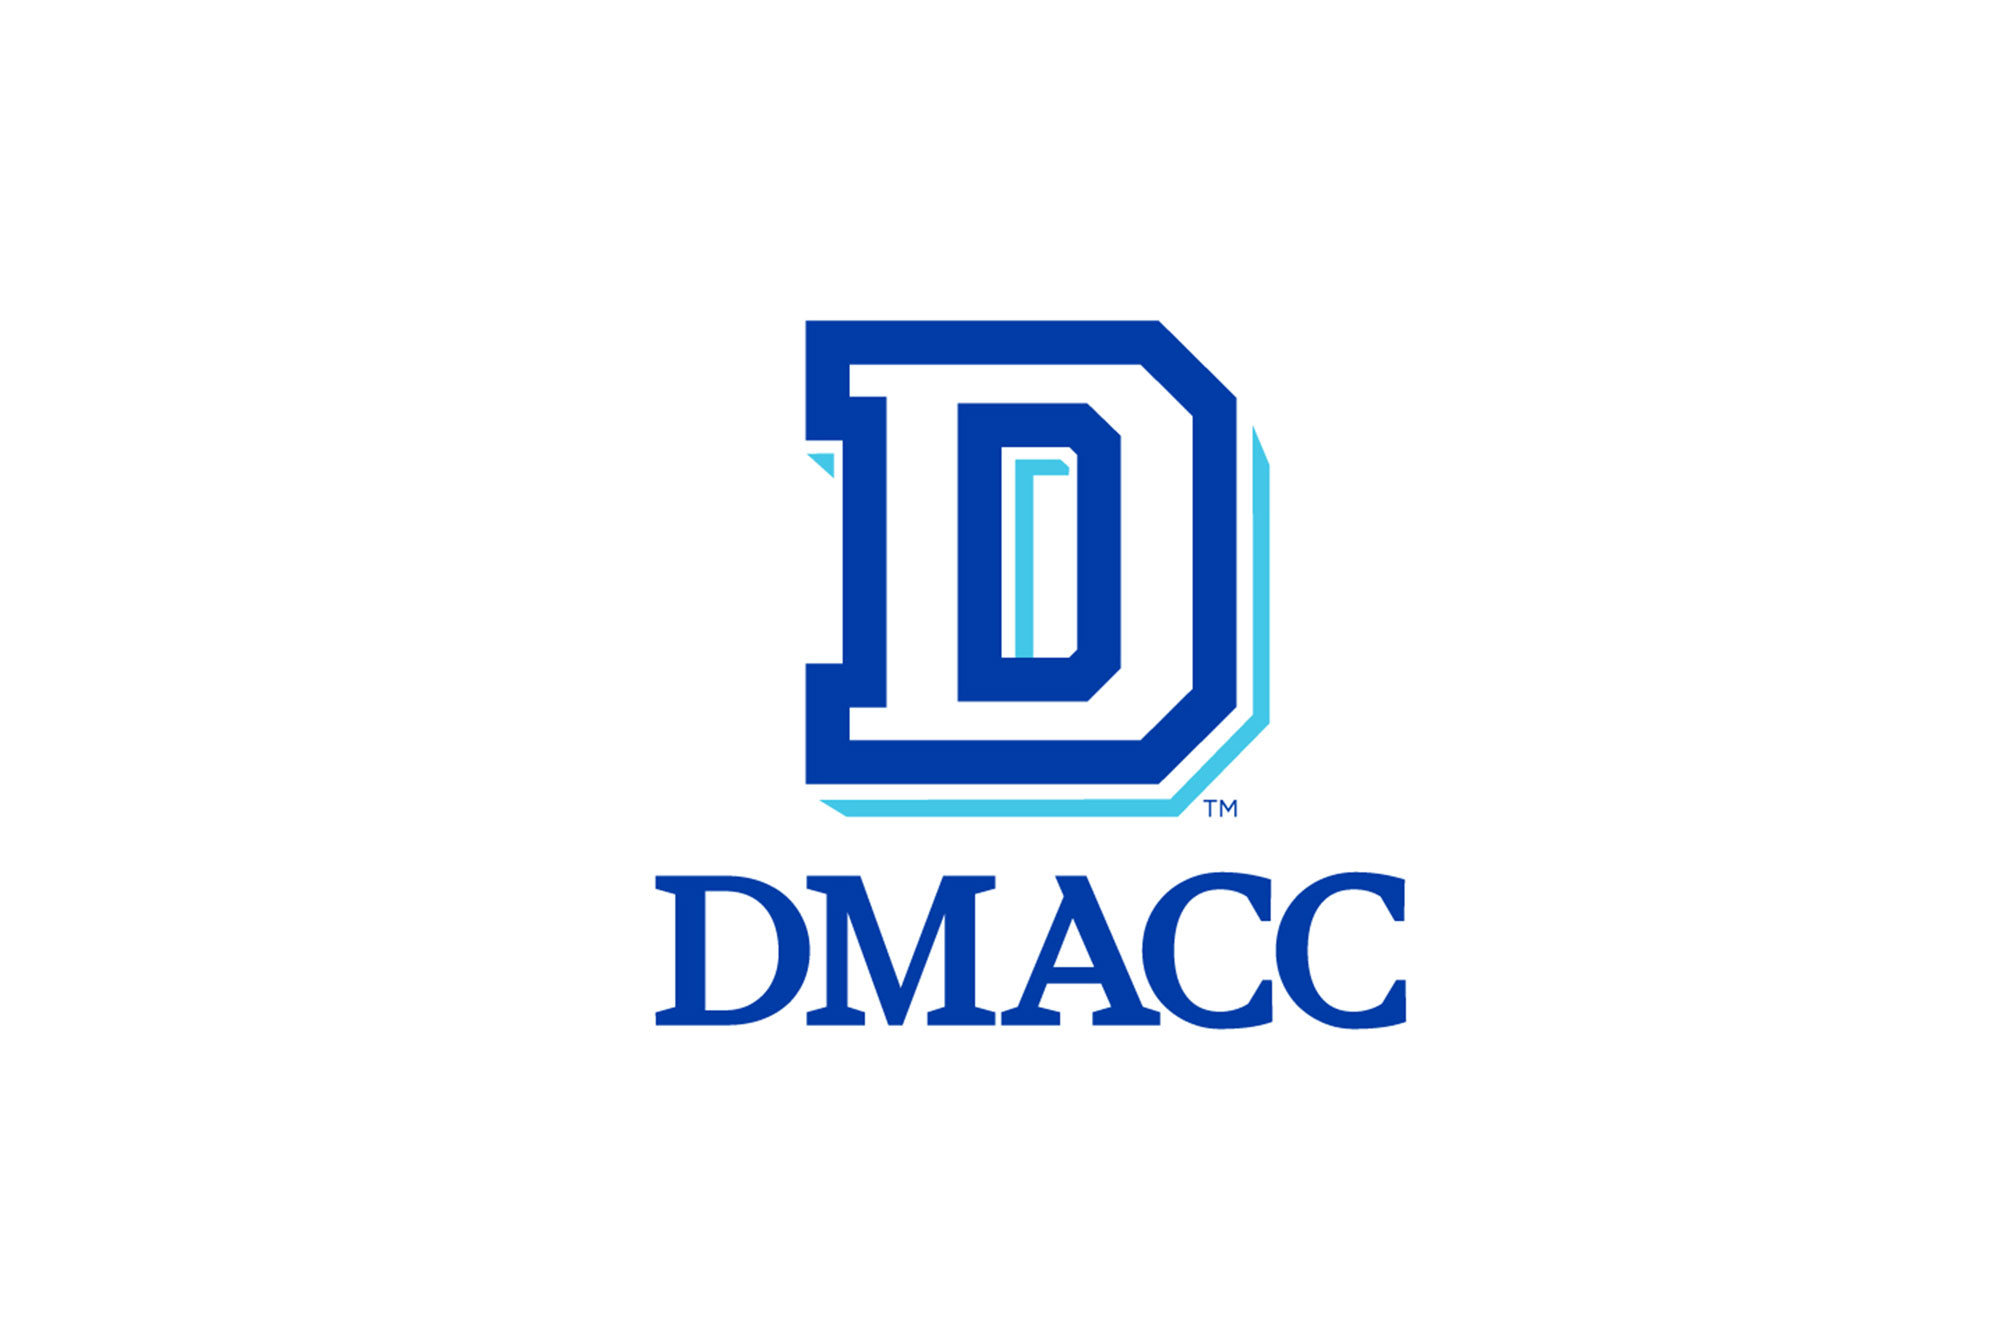 Fresh new look reflects strong and continued growth at DMACC